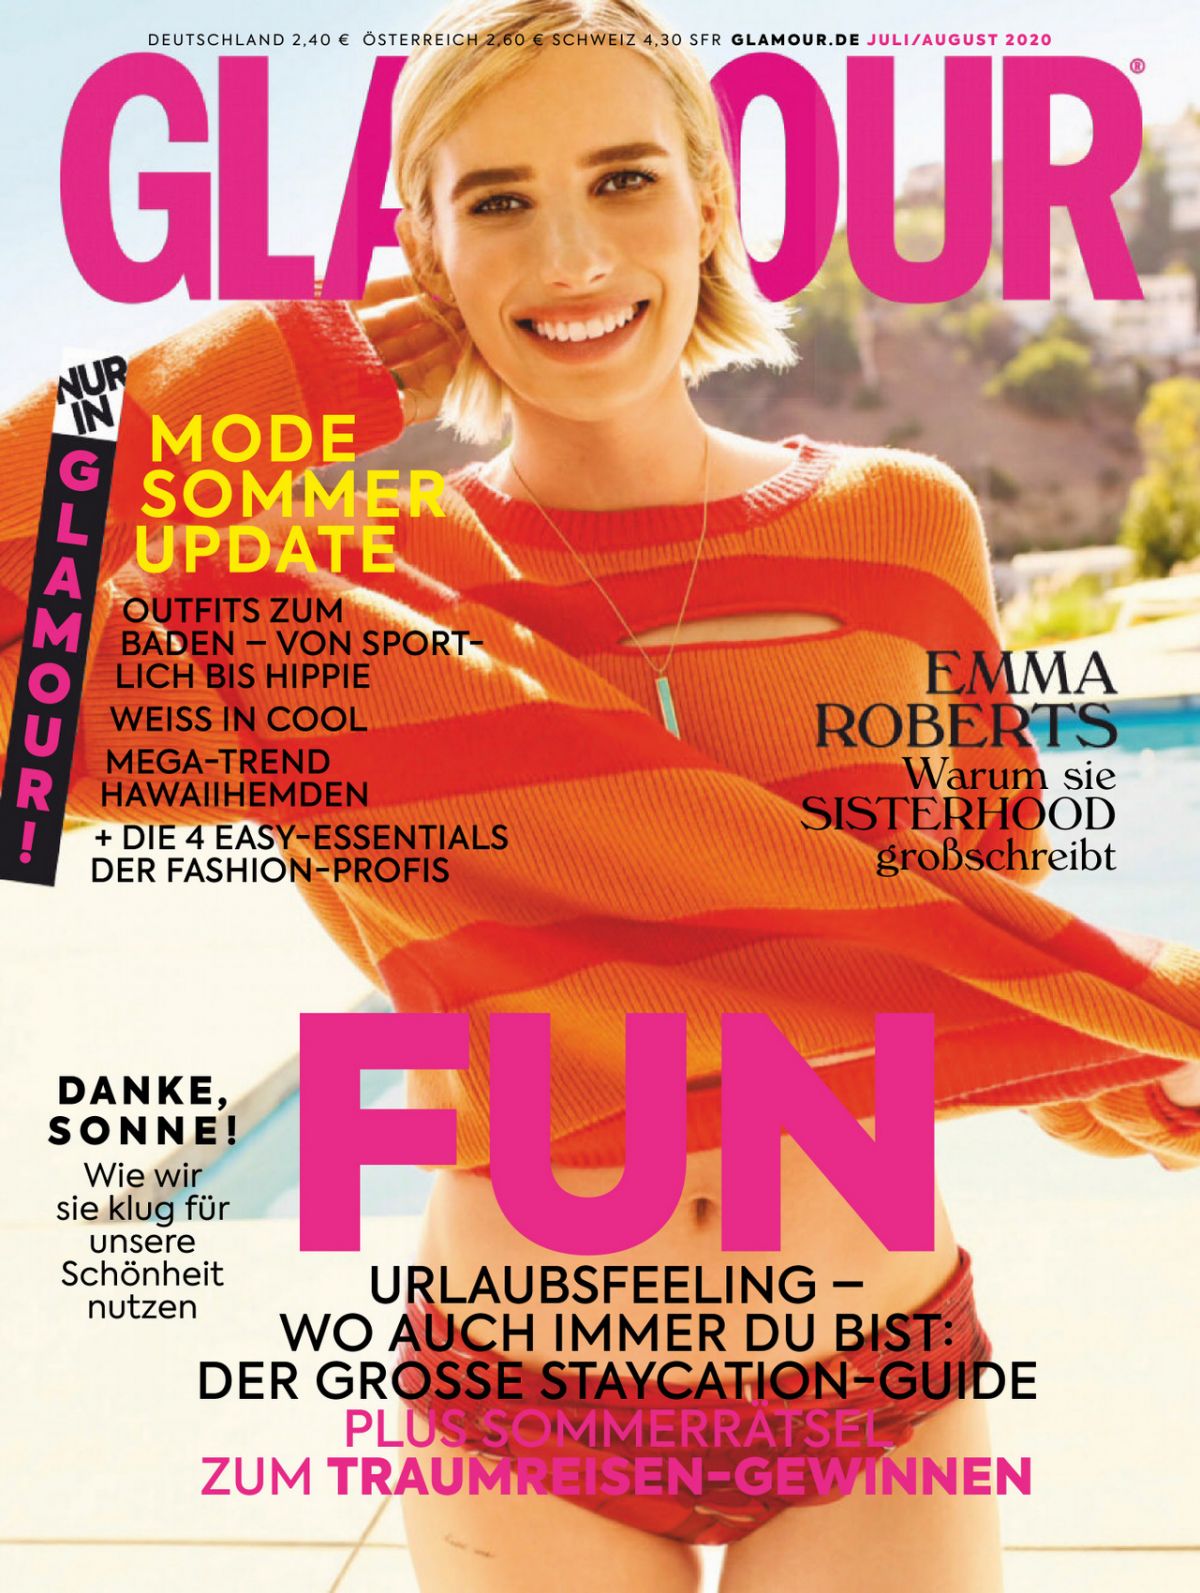 Emma Roberts in Glamour Magazine, Germany July/August 2020